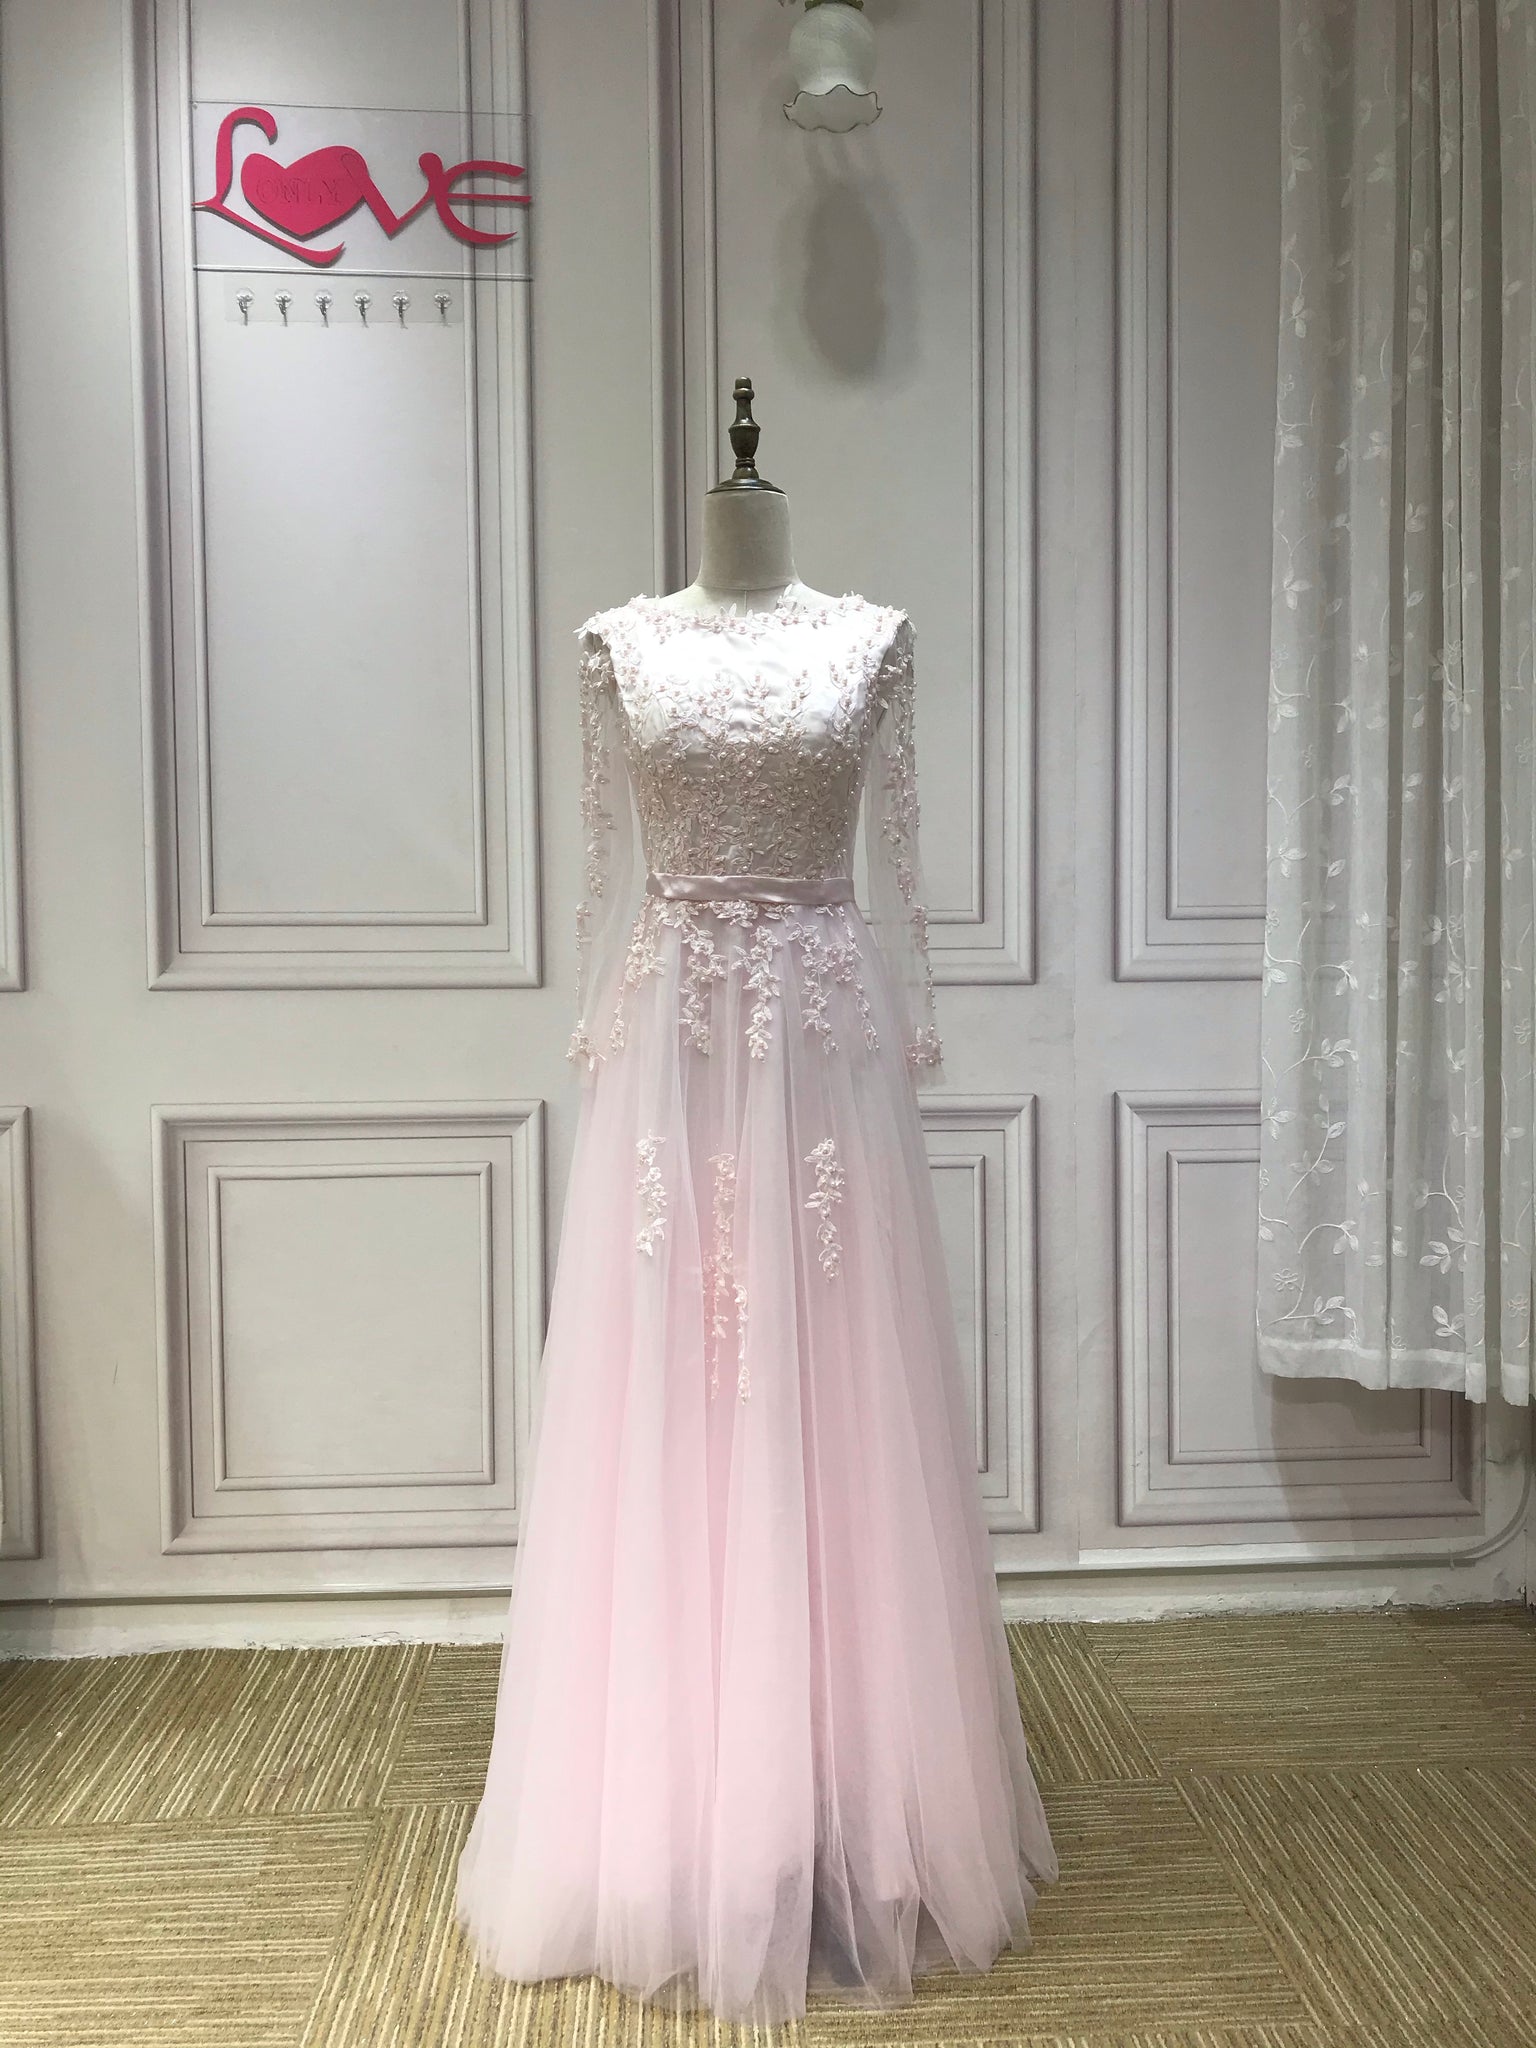 Illusion Cut-out Pink Lace Mermaid Prom Dress - Promfy